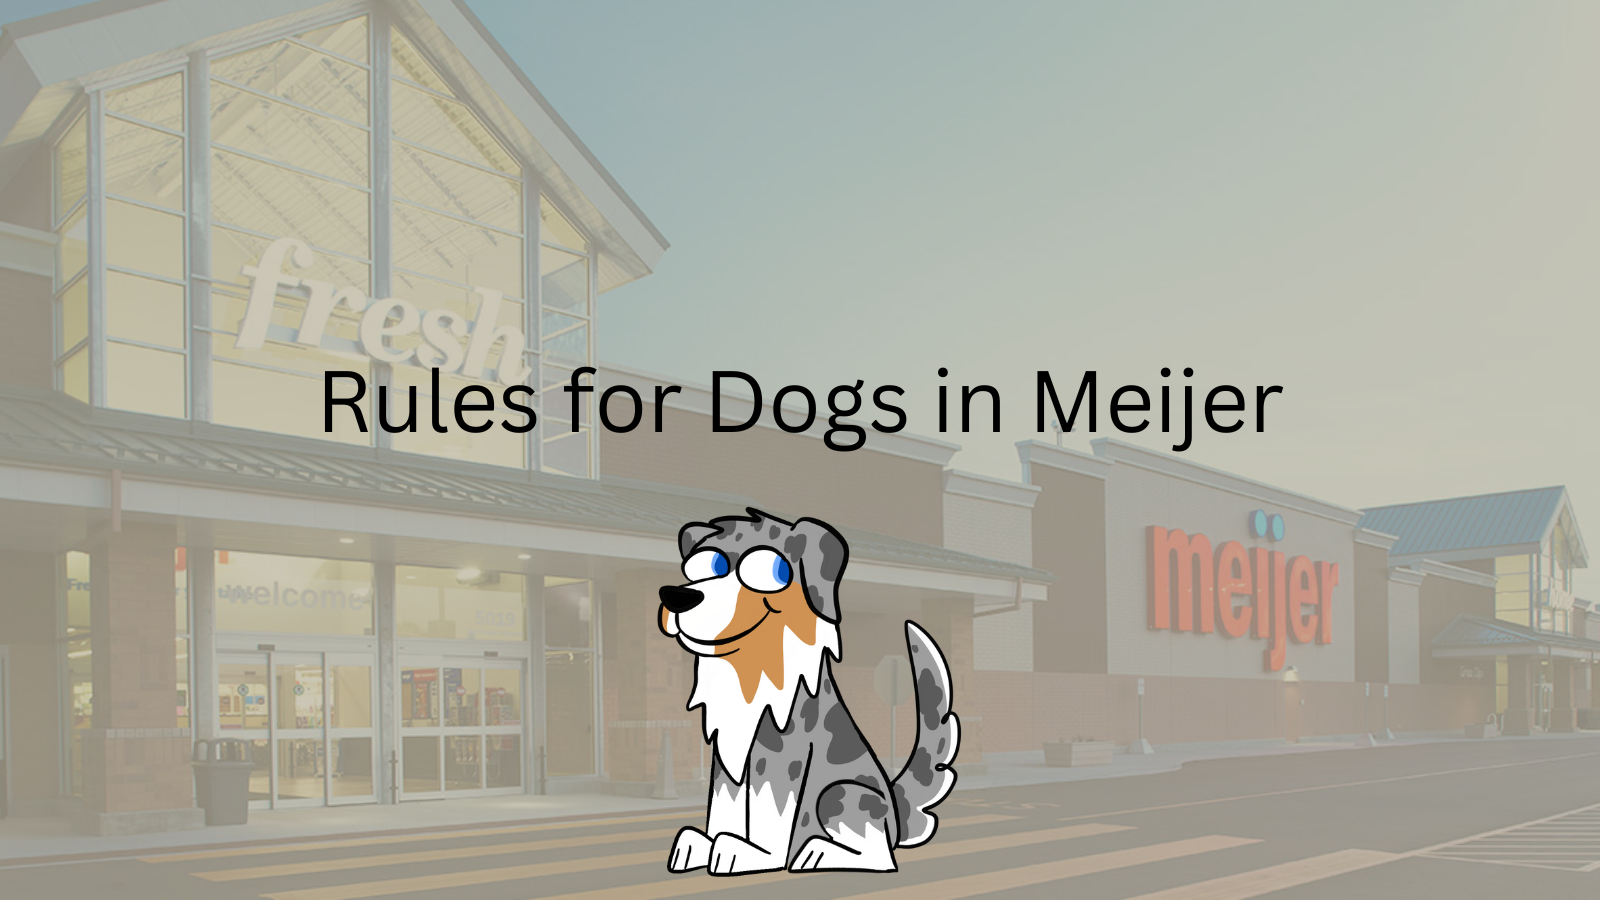 Image Text: "Rules for Dogs in Meijer"